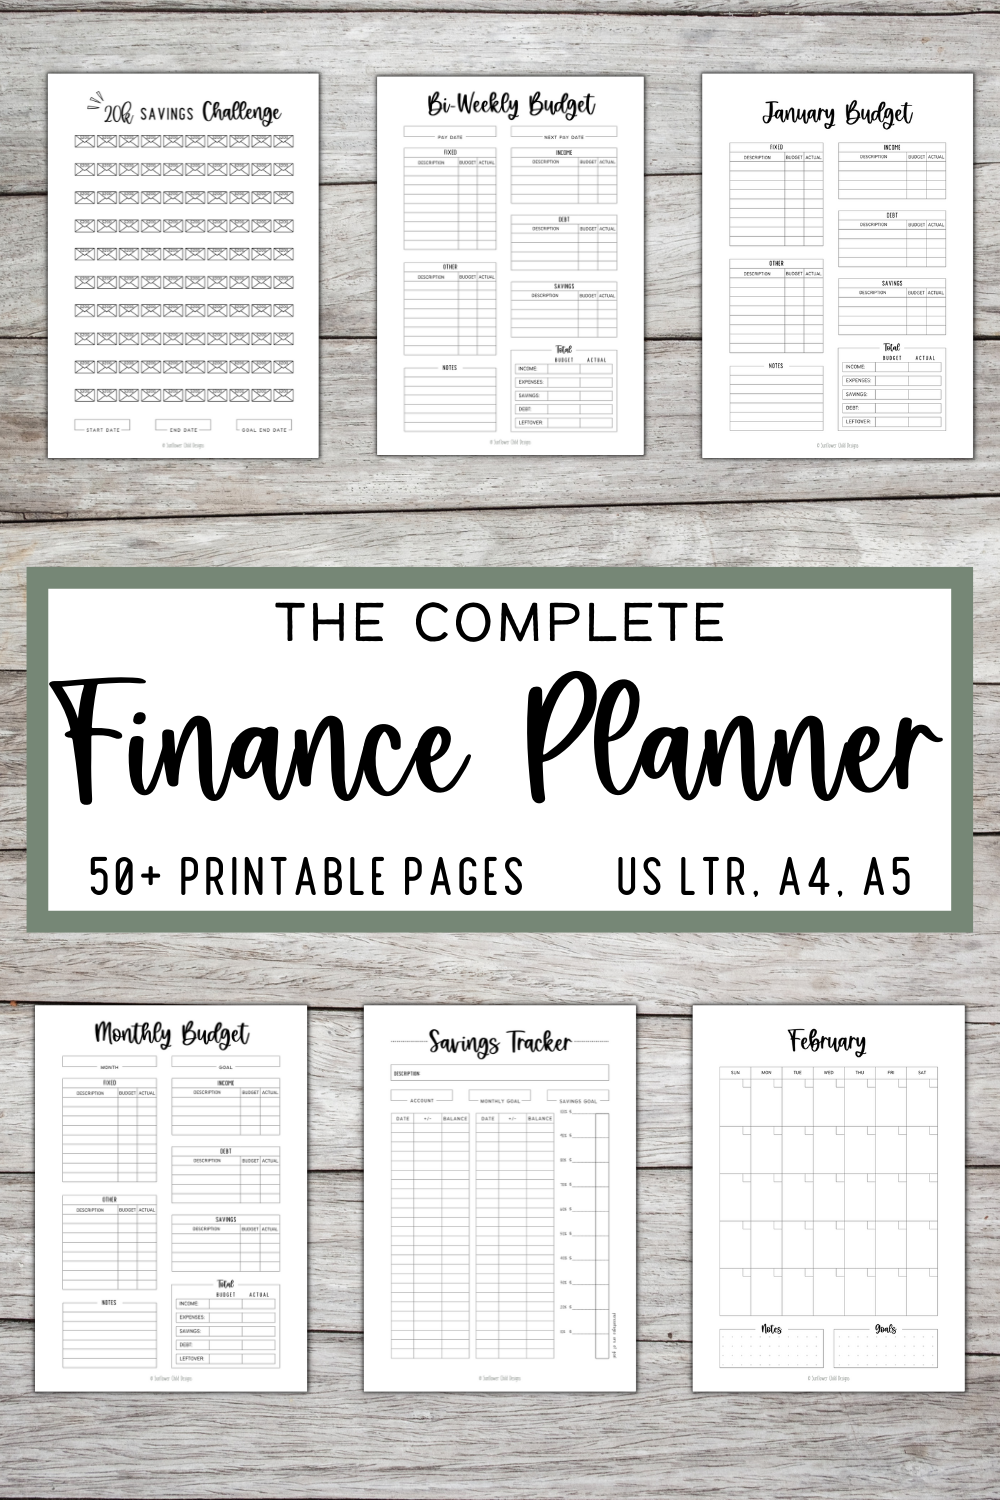 Customizable Finance Planner: For Budgeting, Saving and Paying off